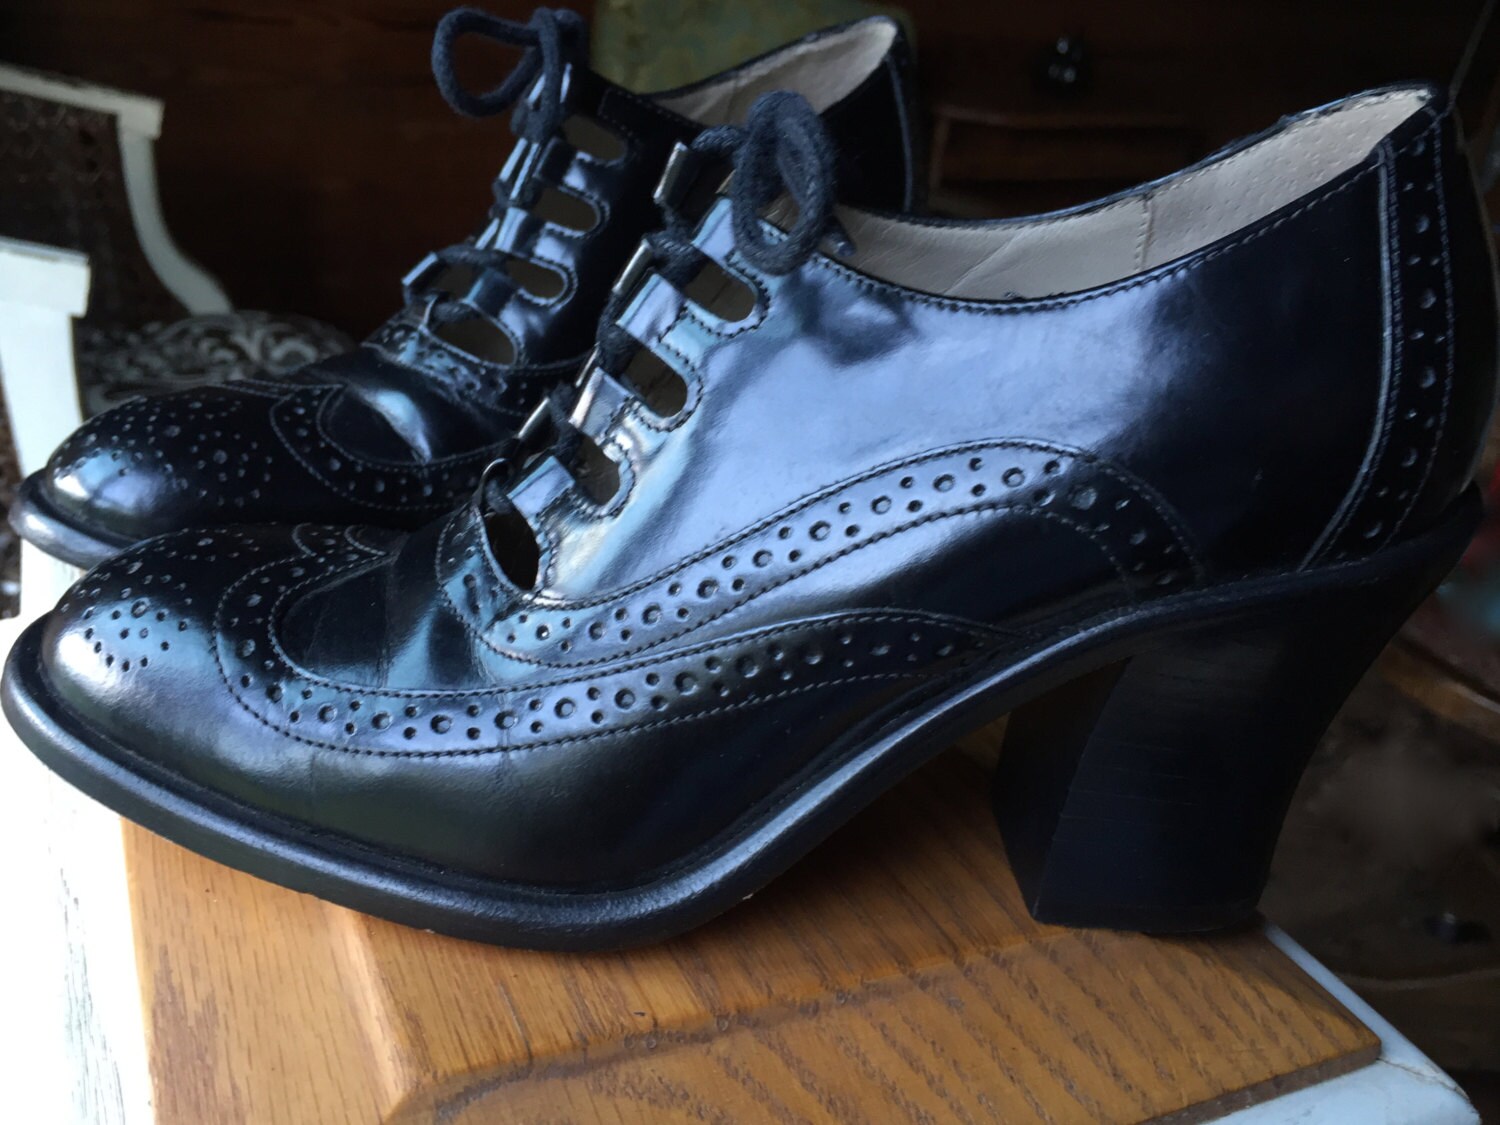 Lace Up Heels Oxfords Black Leather Size 6 M Made In Brazil